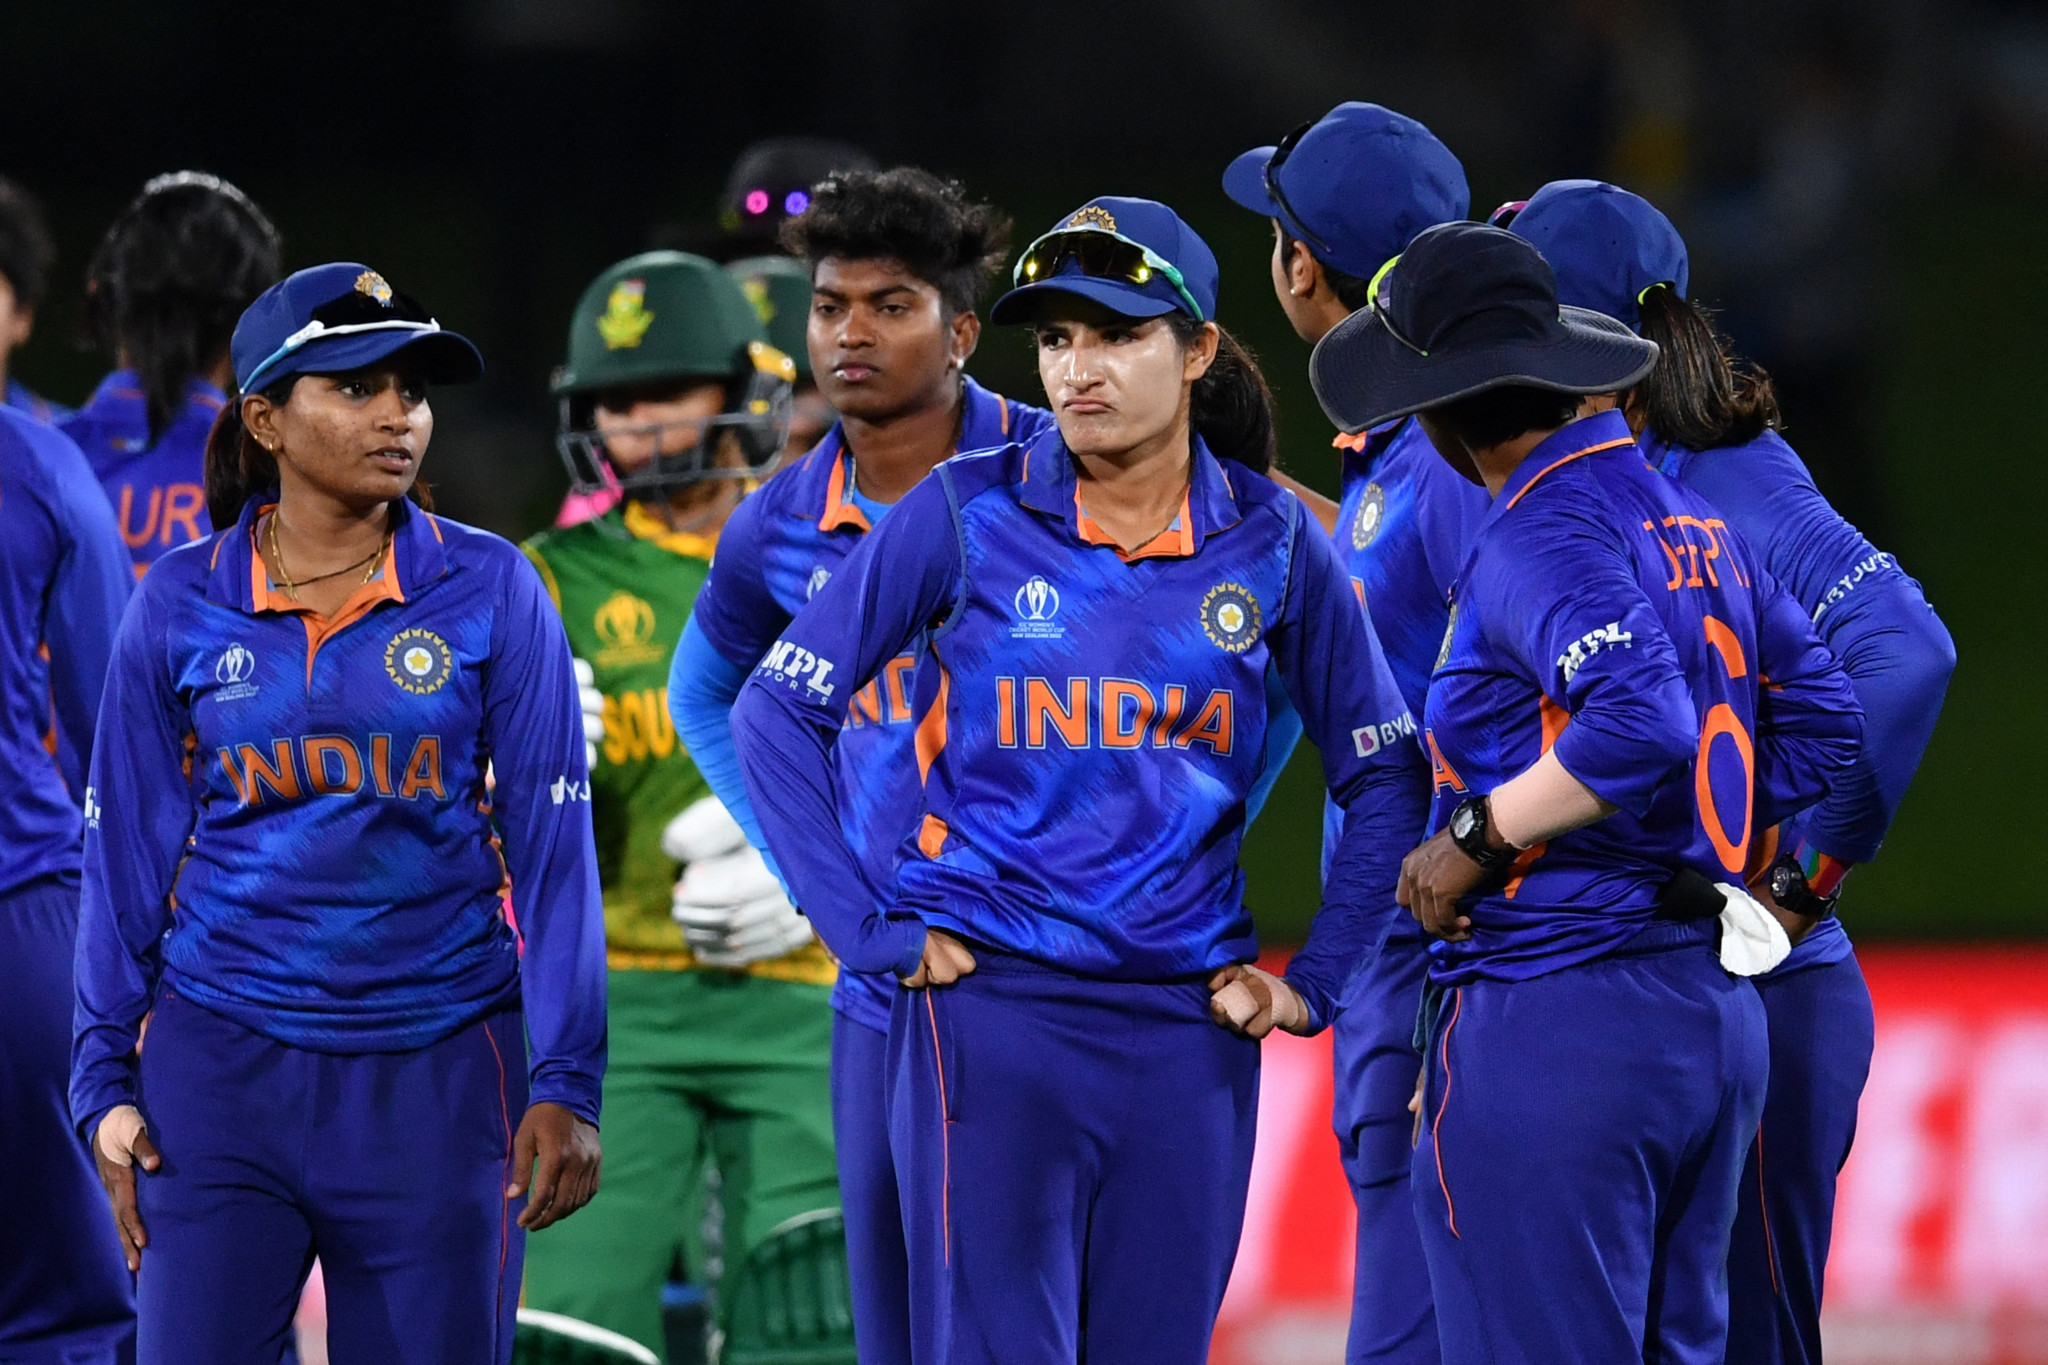 India eliminated from Women’s Cricket World Cup after final ball loss to South Africa